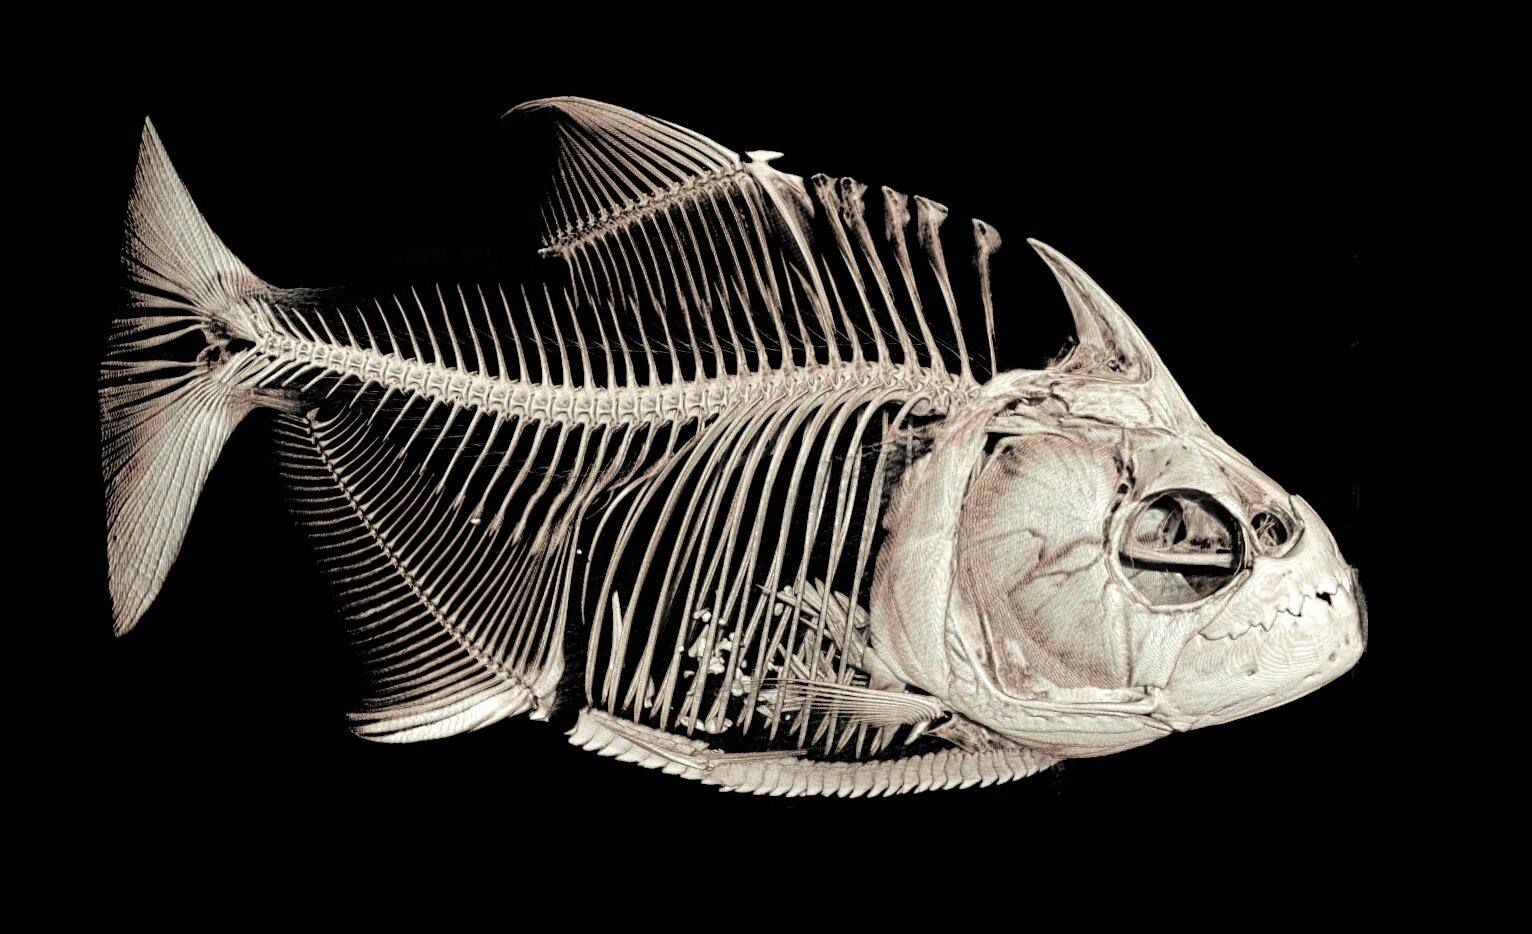 photo of Piranha fish swap old teeth for new simultaneously image